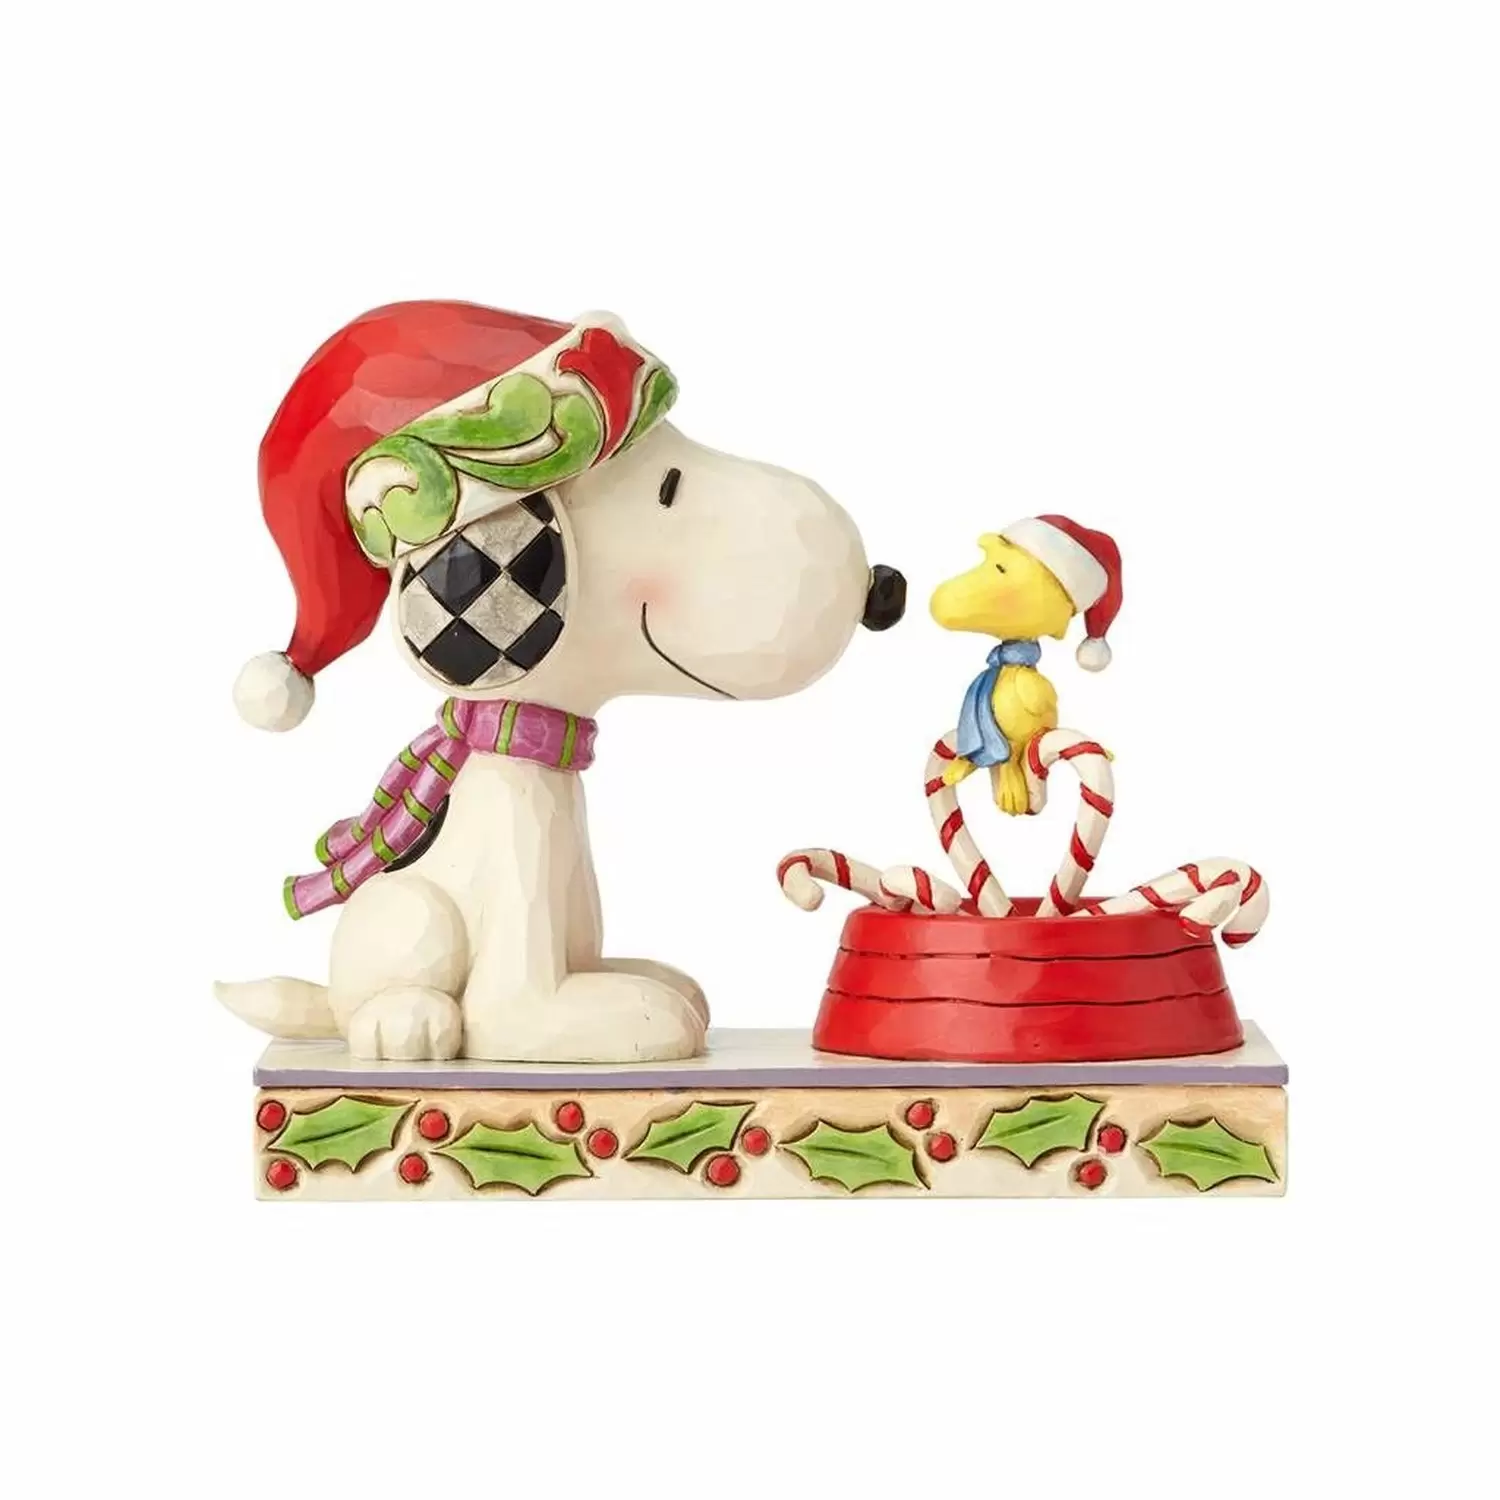 Peanuts - Jim Shore - Candy Cane Christmas - Snoopy & Woodstock with Candy Cane